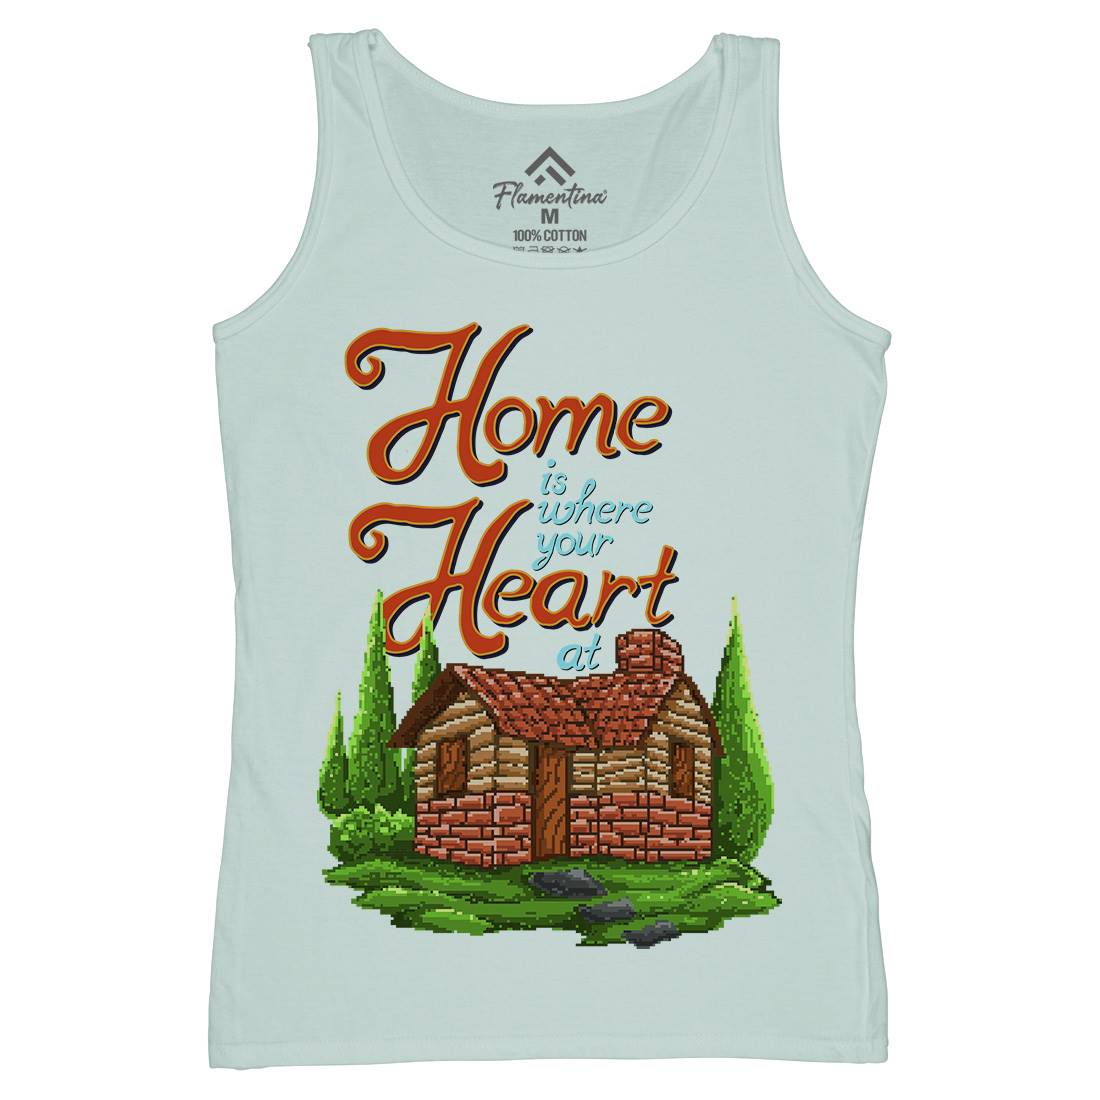 House Is Where Your Heart At Womens Organic Tank Top Vest Nature B912